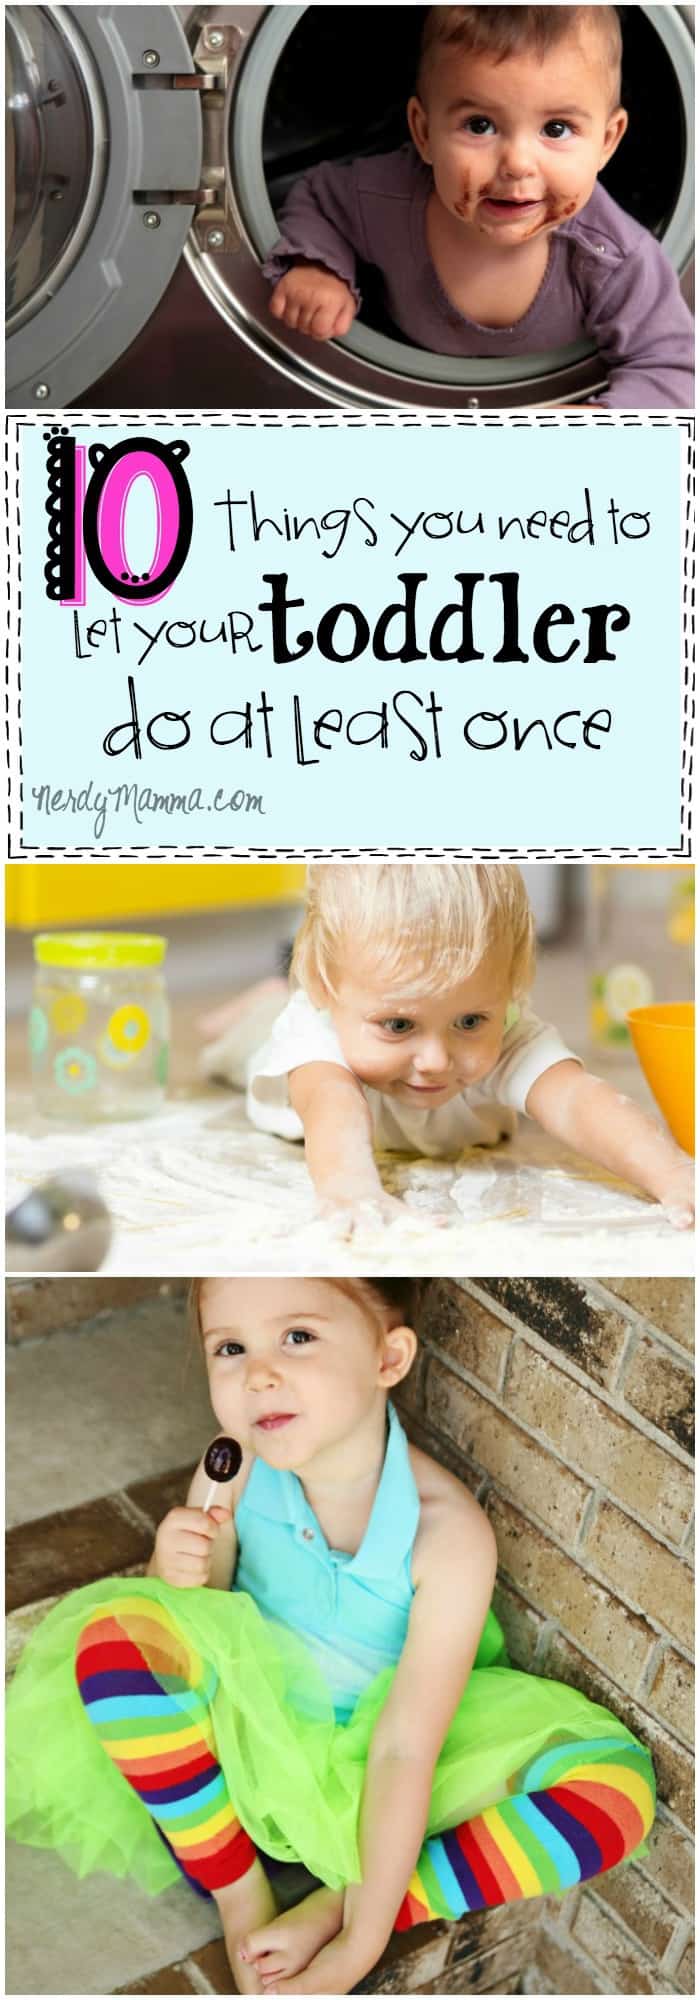 These 10 Things You Need to Let Your Toddler Do at Least Once is so SPOT ON! I think all the little kids should just be allowed to be themselves sometimes.